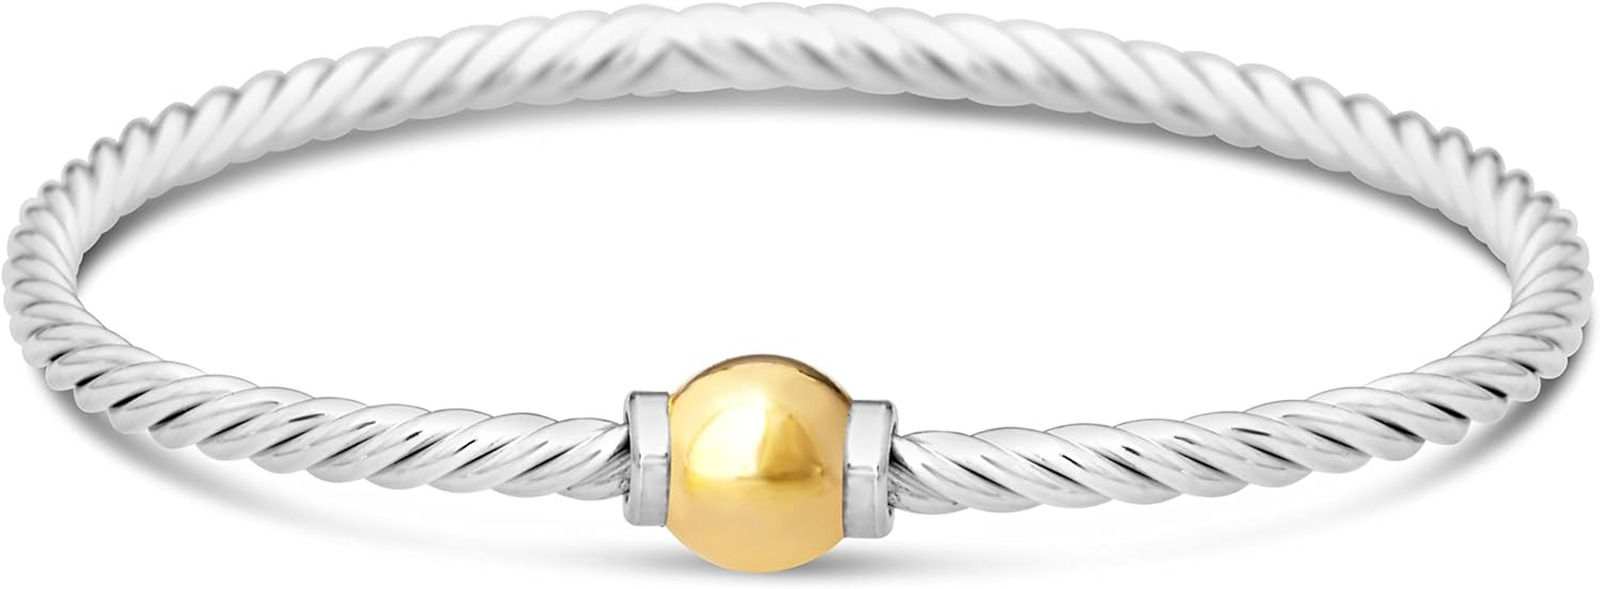 Beach Ball Twist Bracelet from Cape Cod Two-Tone 14K Solid Ball Gold and 925 Ste